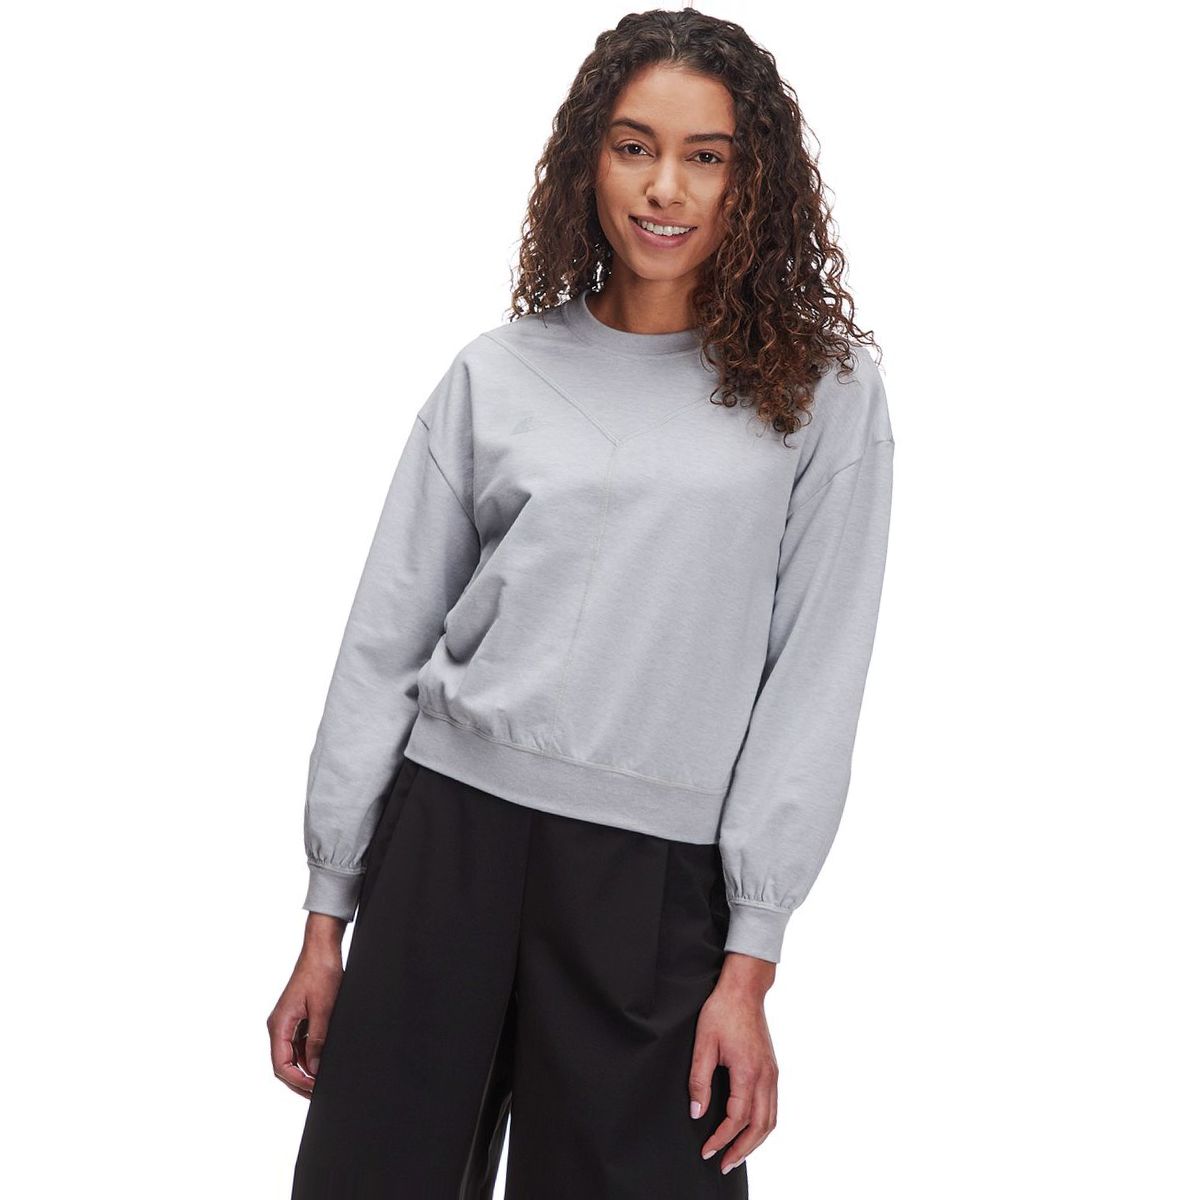 The North Face Ascential Pullover Sweatshirt - Women's